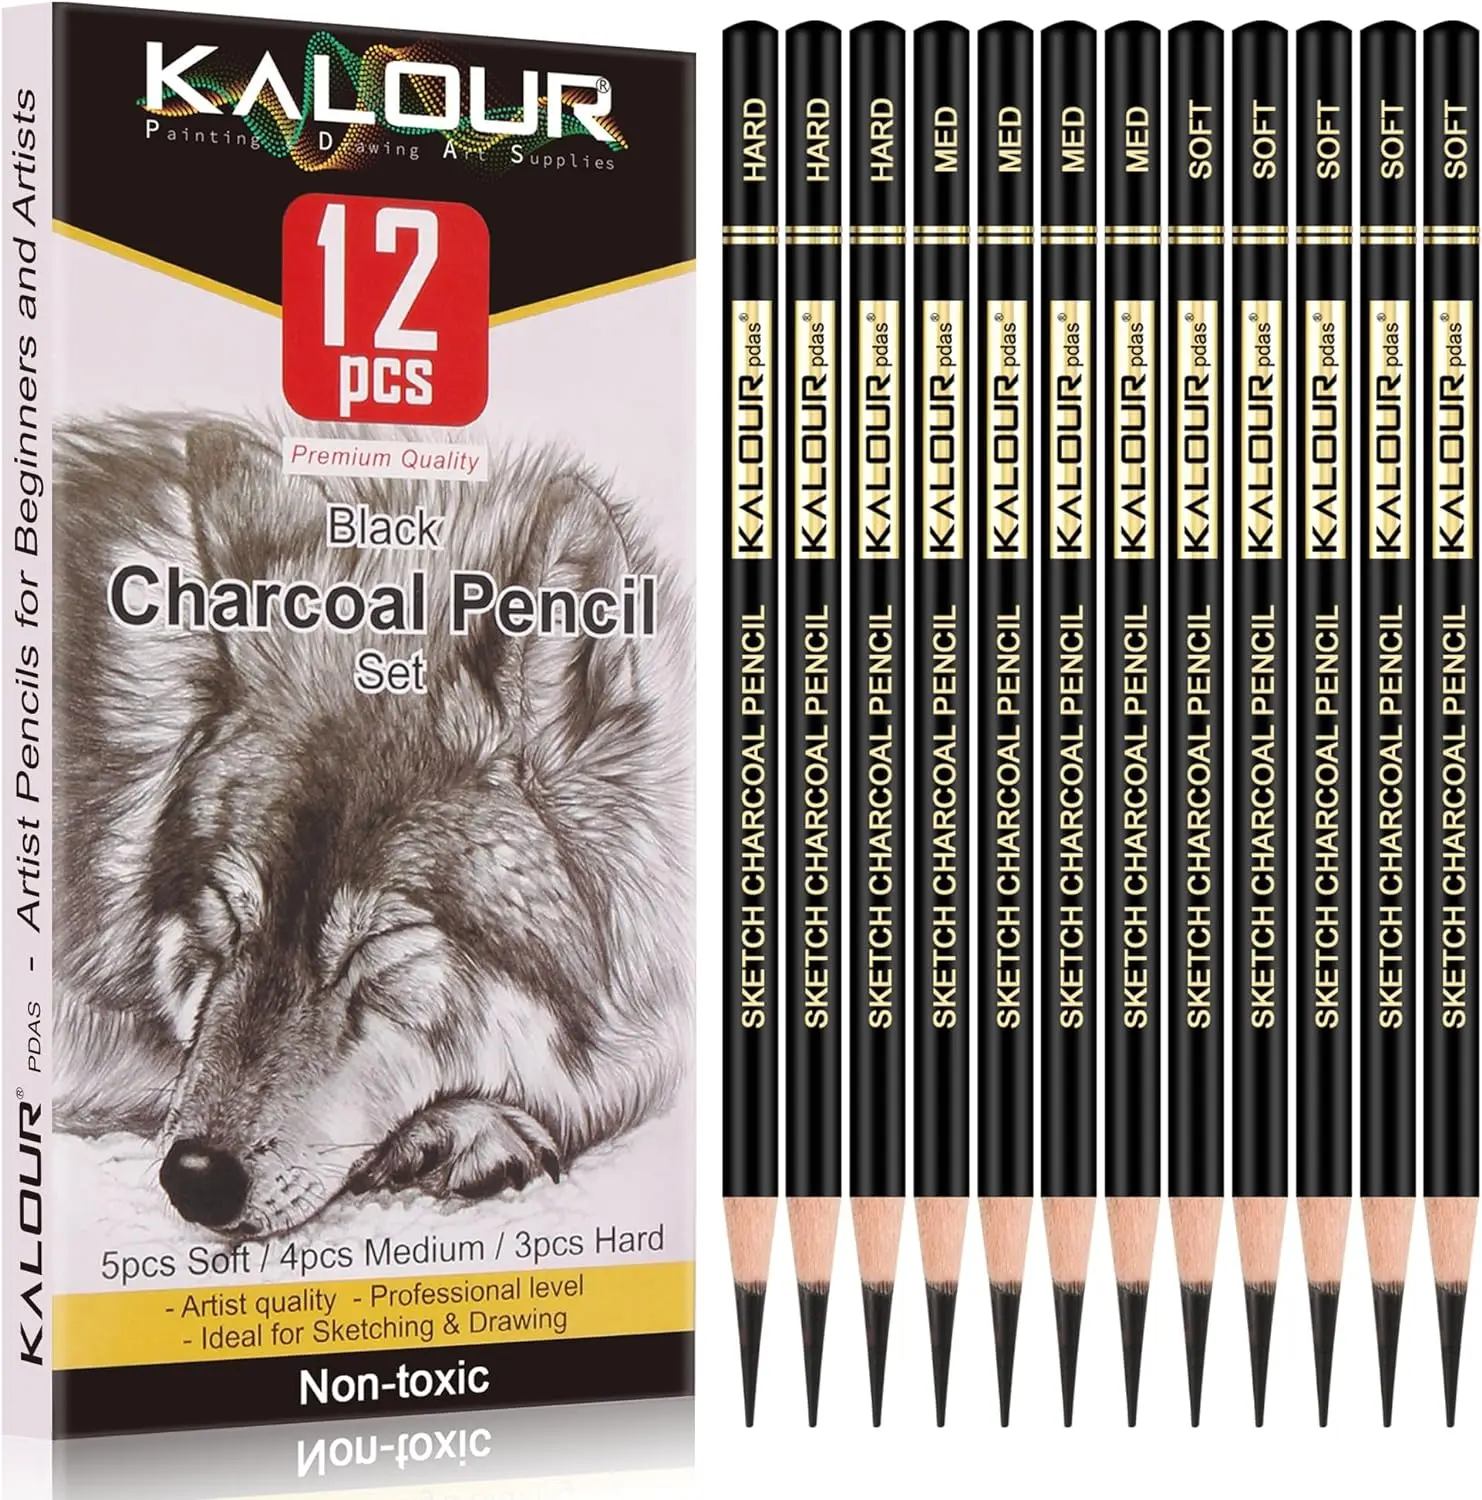 Professional Charcoal Pencils Drawing Set -12 Pieces Soft, Medium and Hard Charcoal Pencils for Drawing, Sketching, Shading, Art 6pcs hobbyist charcoal pencils shading compressed charcoal drawing sketching sticks